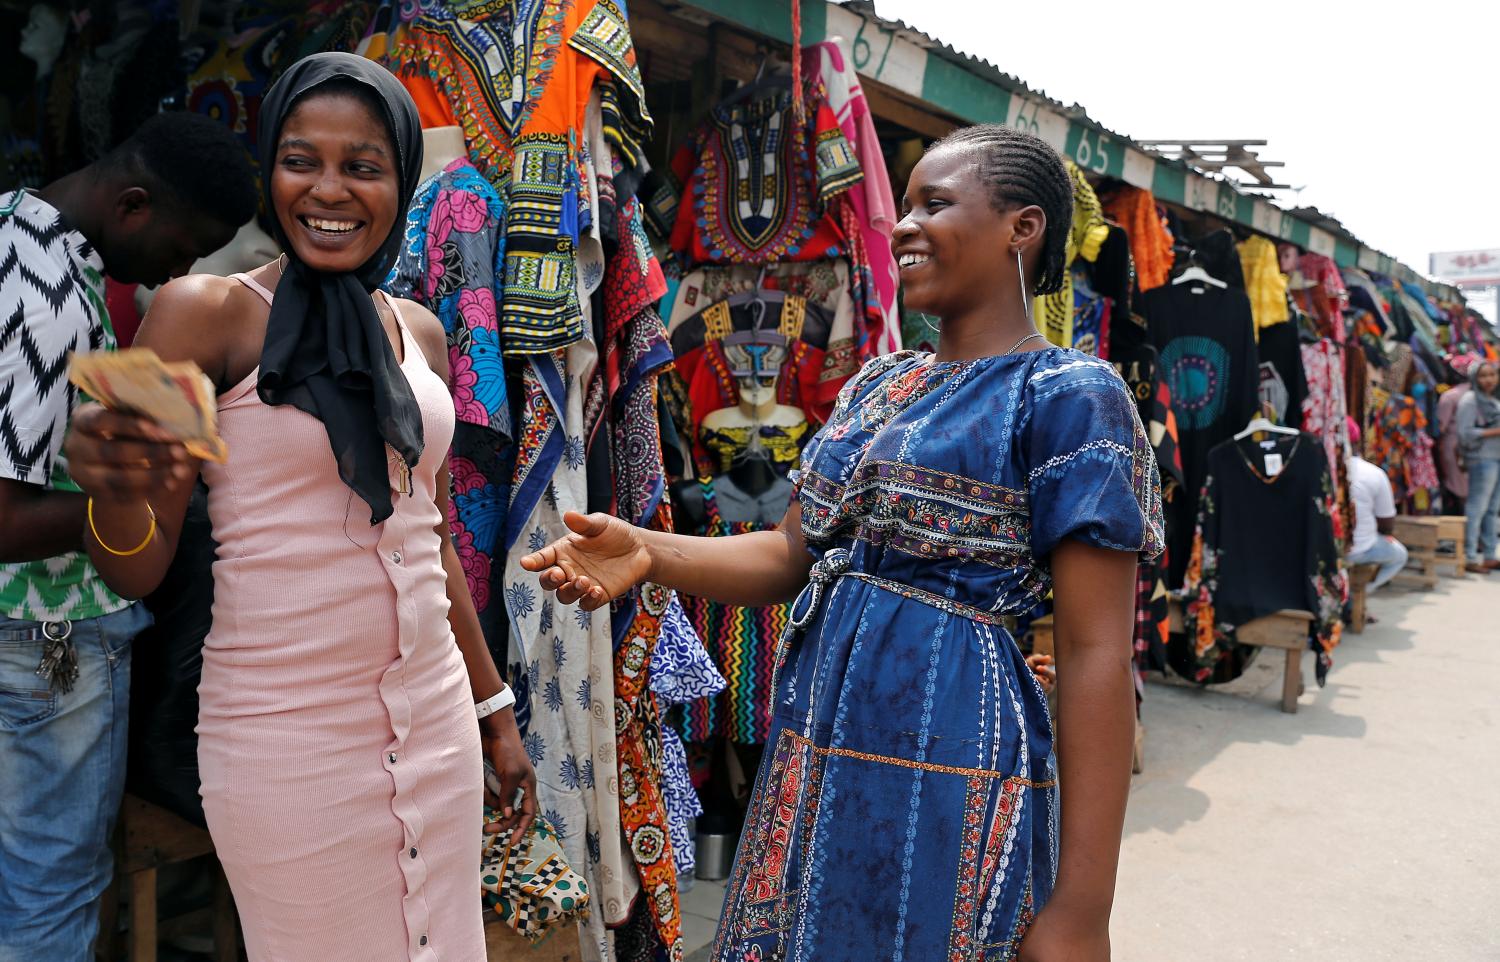 Clothes sellers exchange money in Marina, in Nigeria's commercial capital of Lagos, Nigeria February 11, 2019. REUTERS/Nyancho NwaNri - RC1C4E42FD10